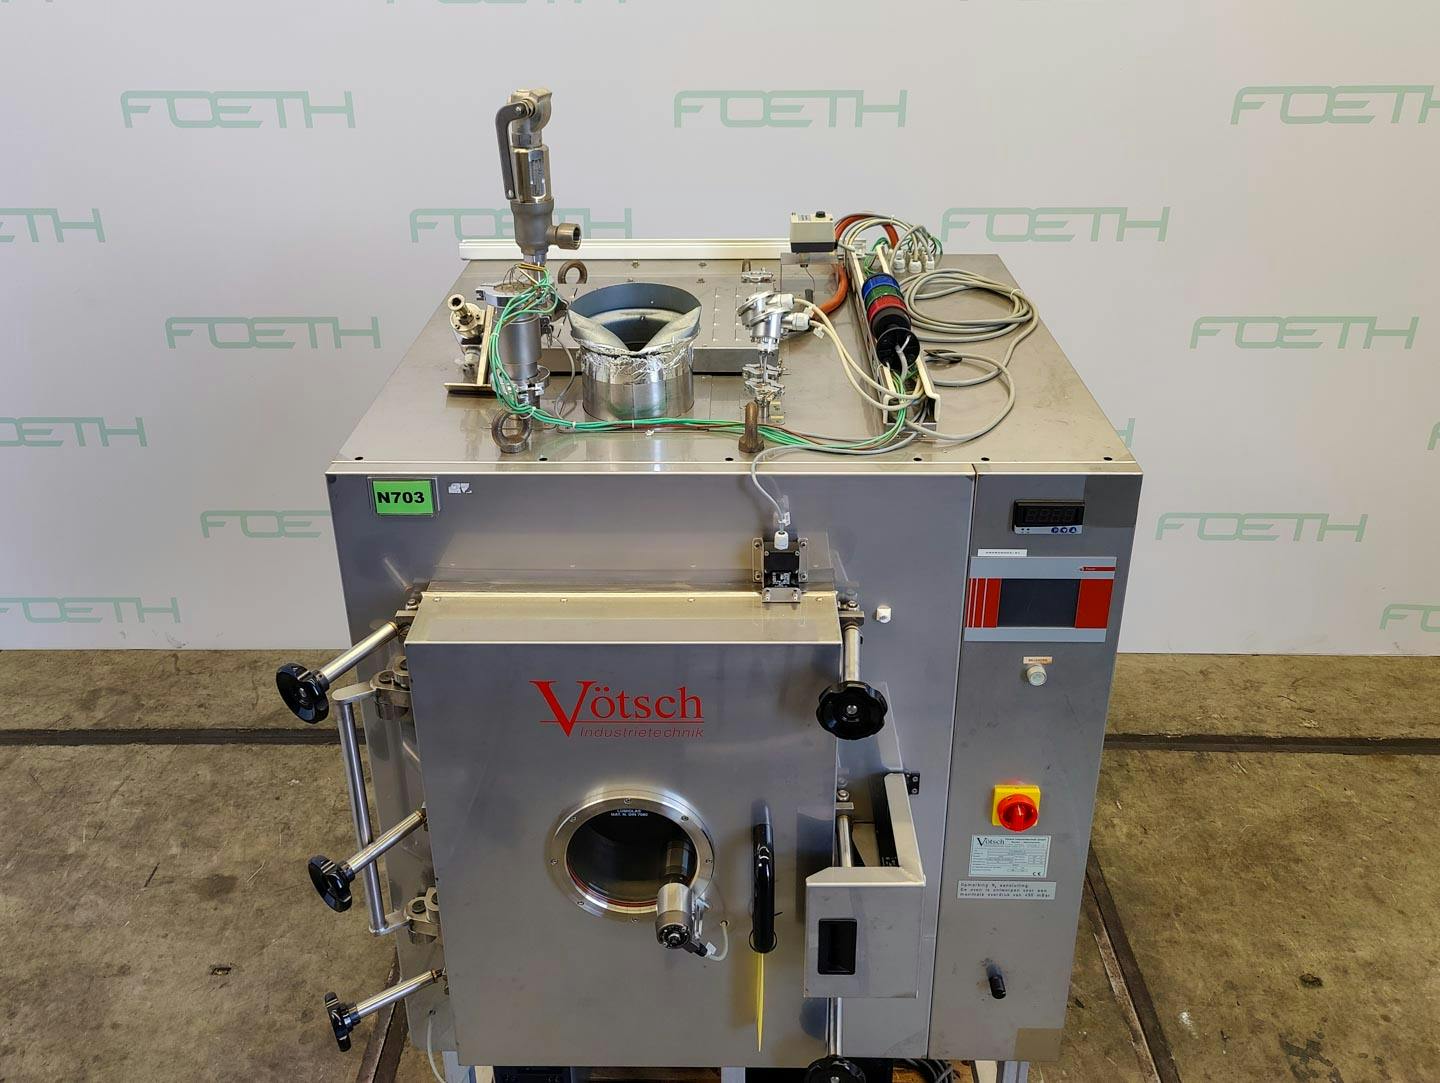 Vötsch VVT 50/65/80 - vacuum drying oven - Droogoven - image 10